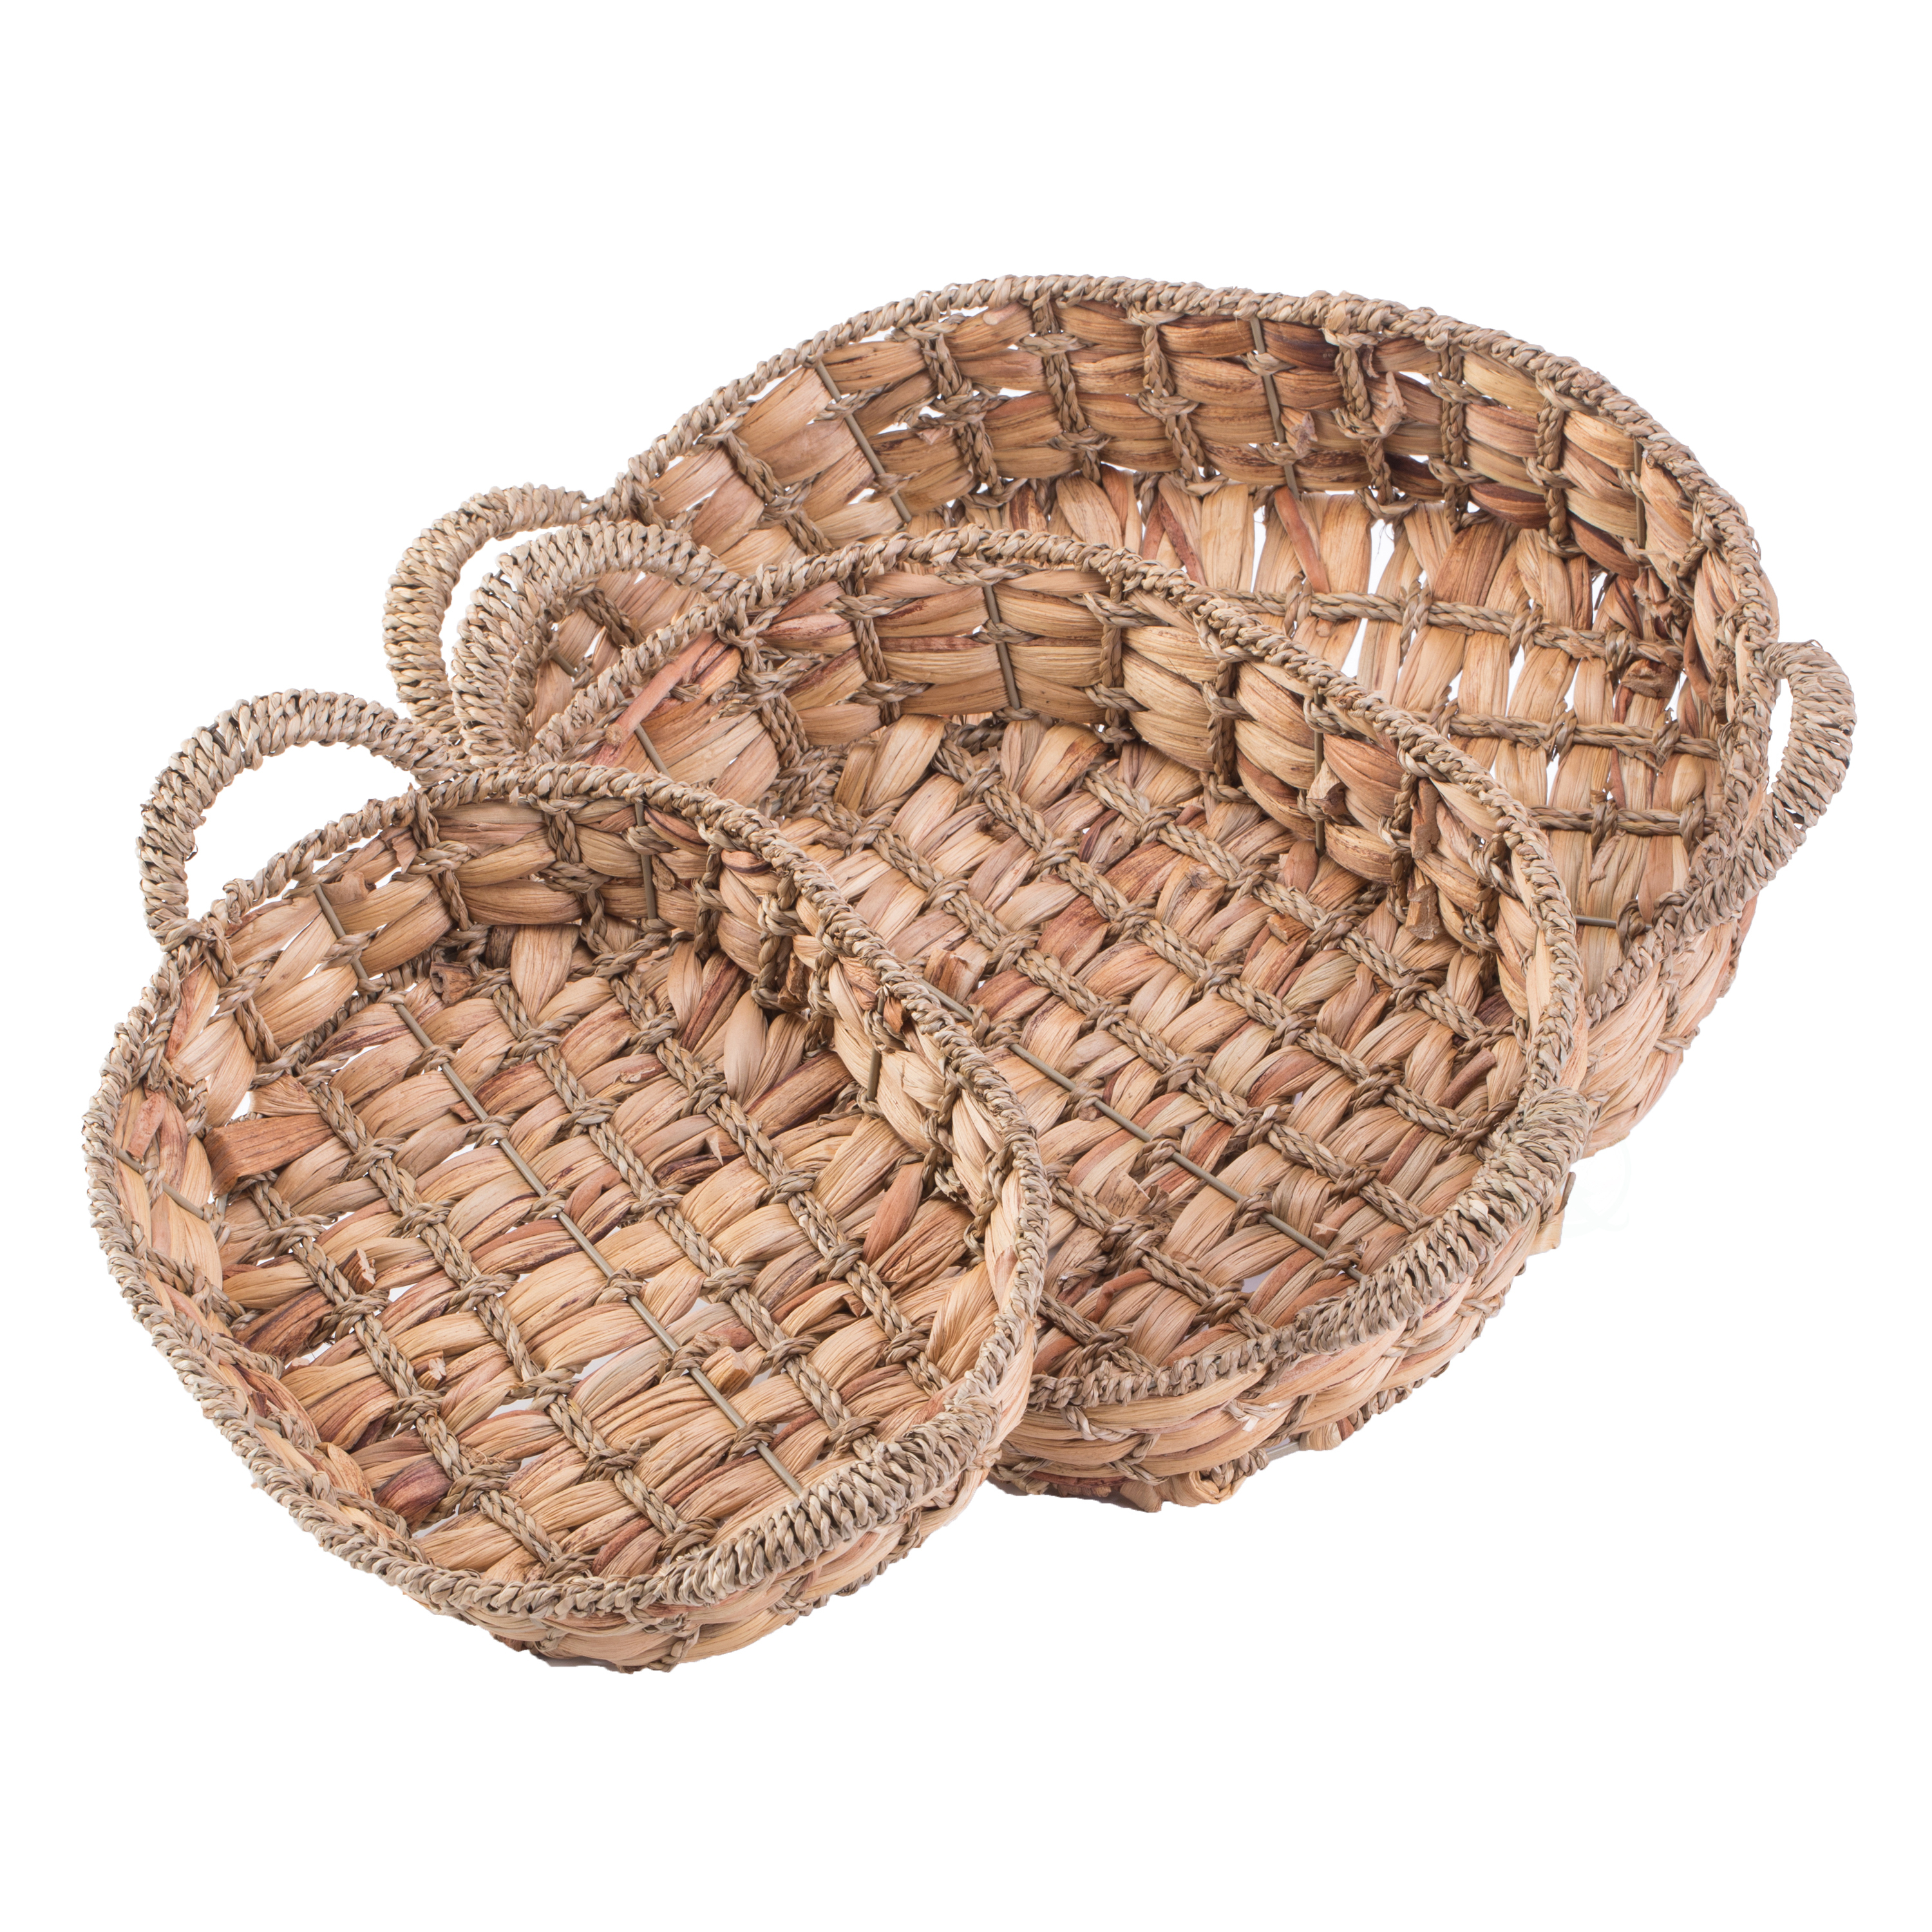 Seagrass Fruit Bread Basket Tray With Handles - Medium